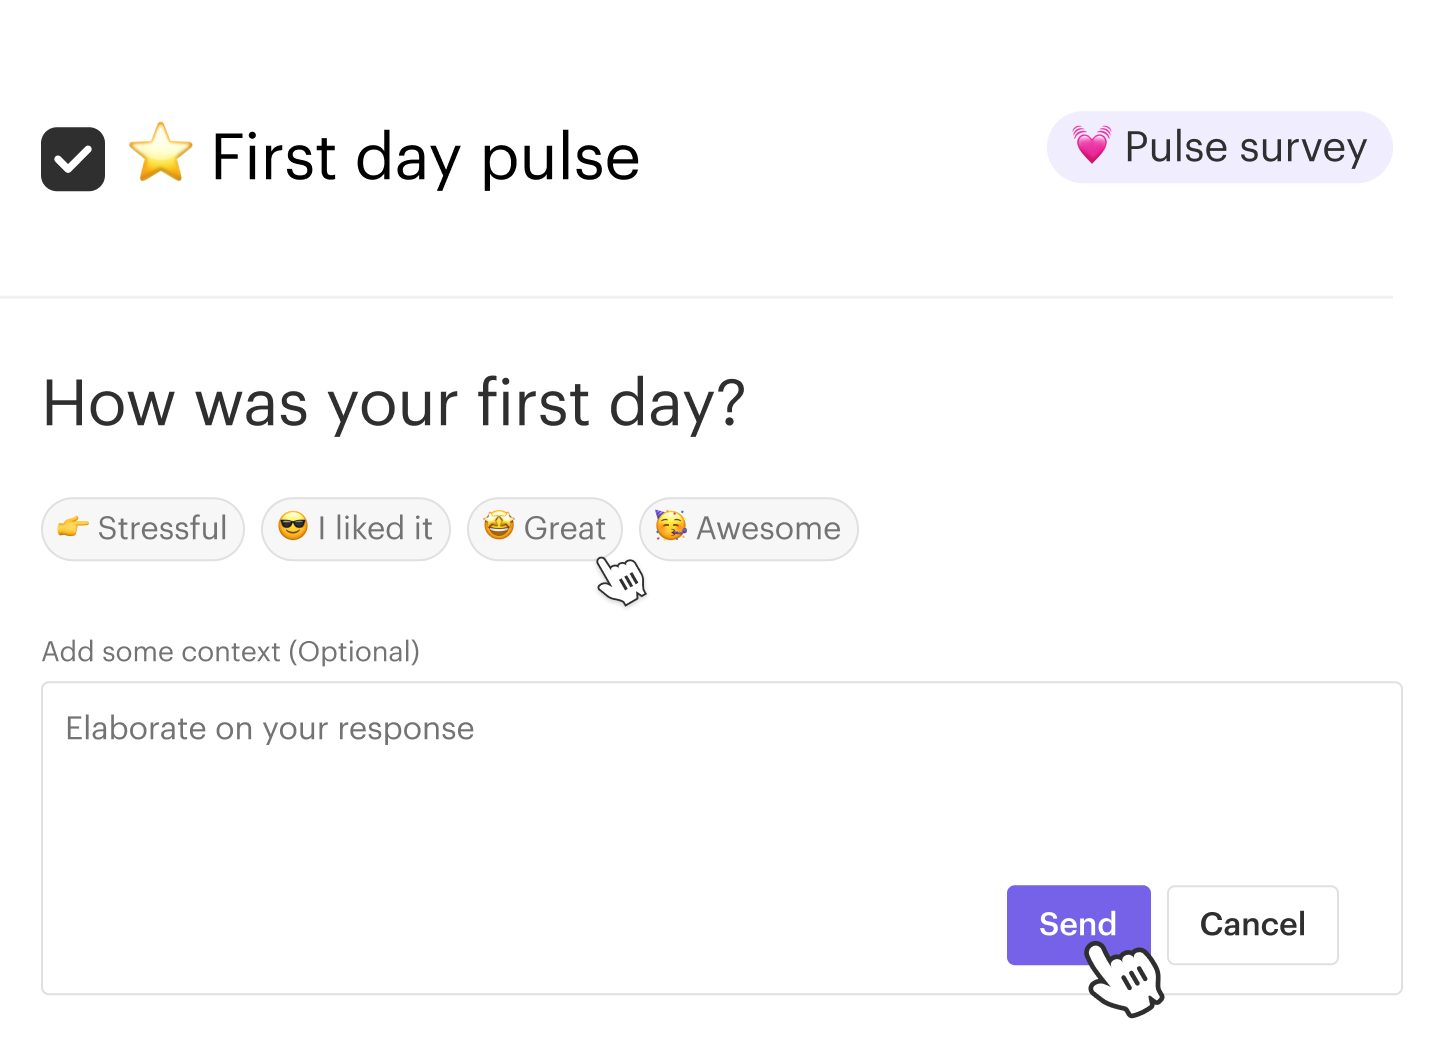 A simple survey question asking a new hire how their first day went. The options to respond are smiley-face emojis that scale from bad to good.